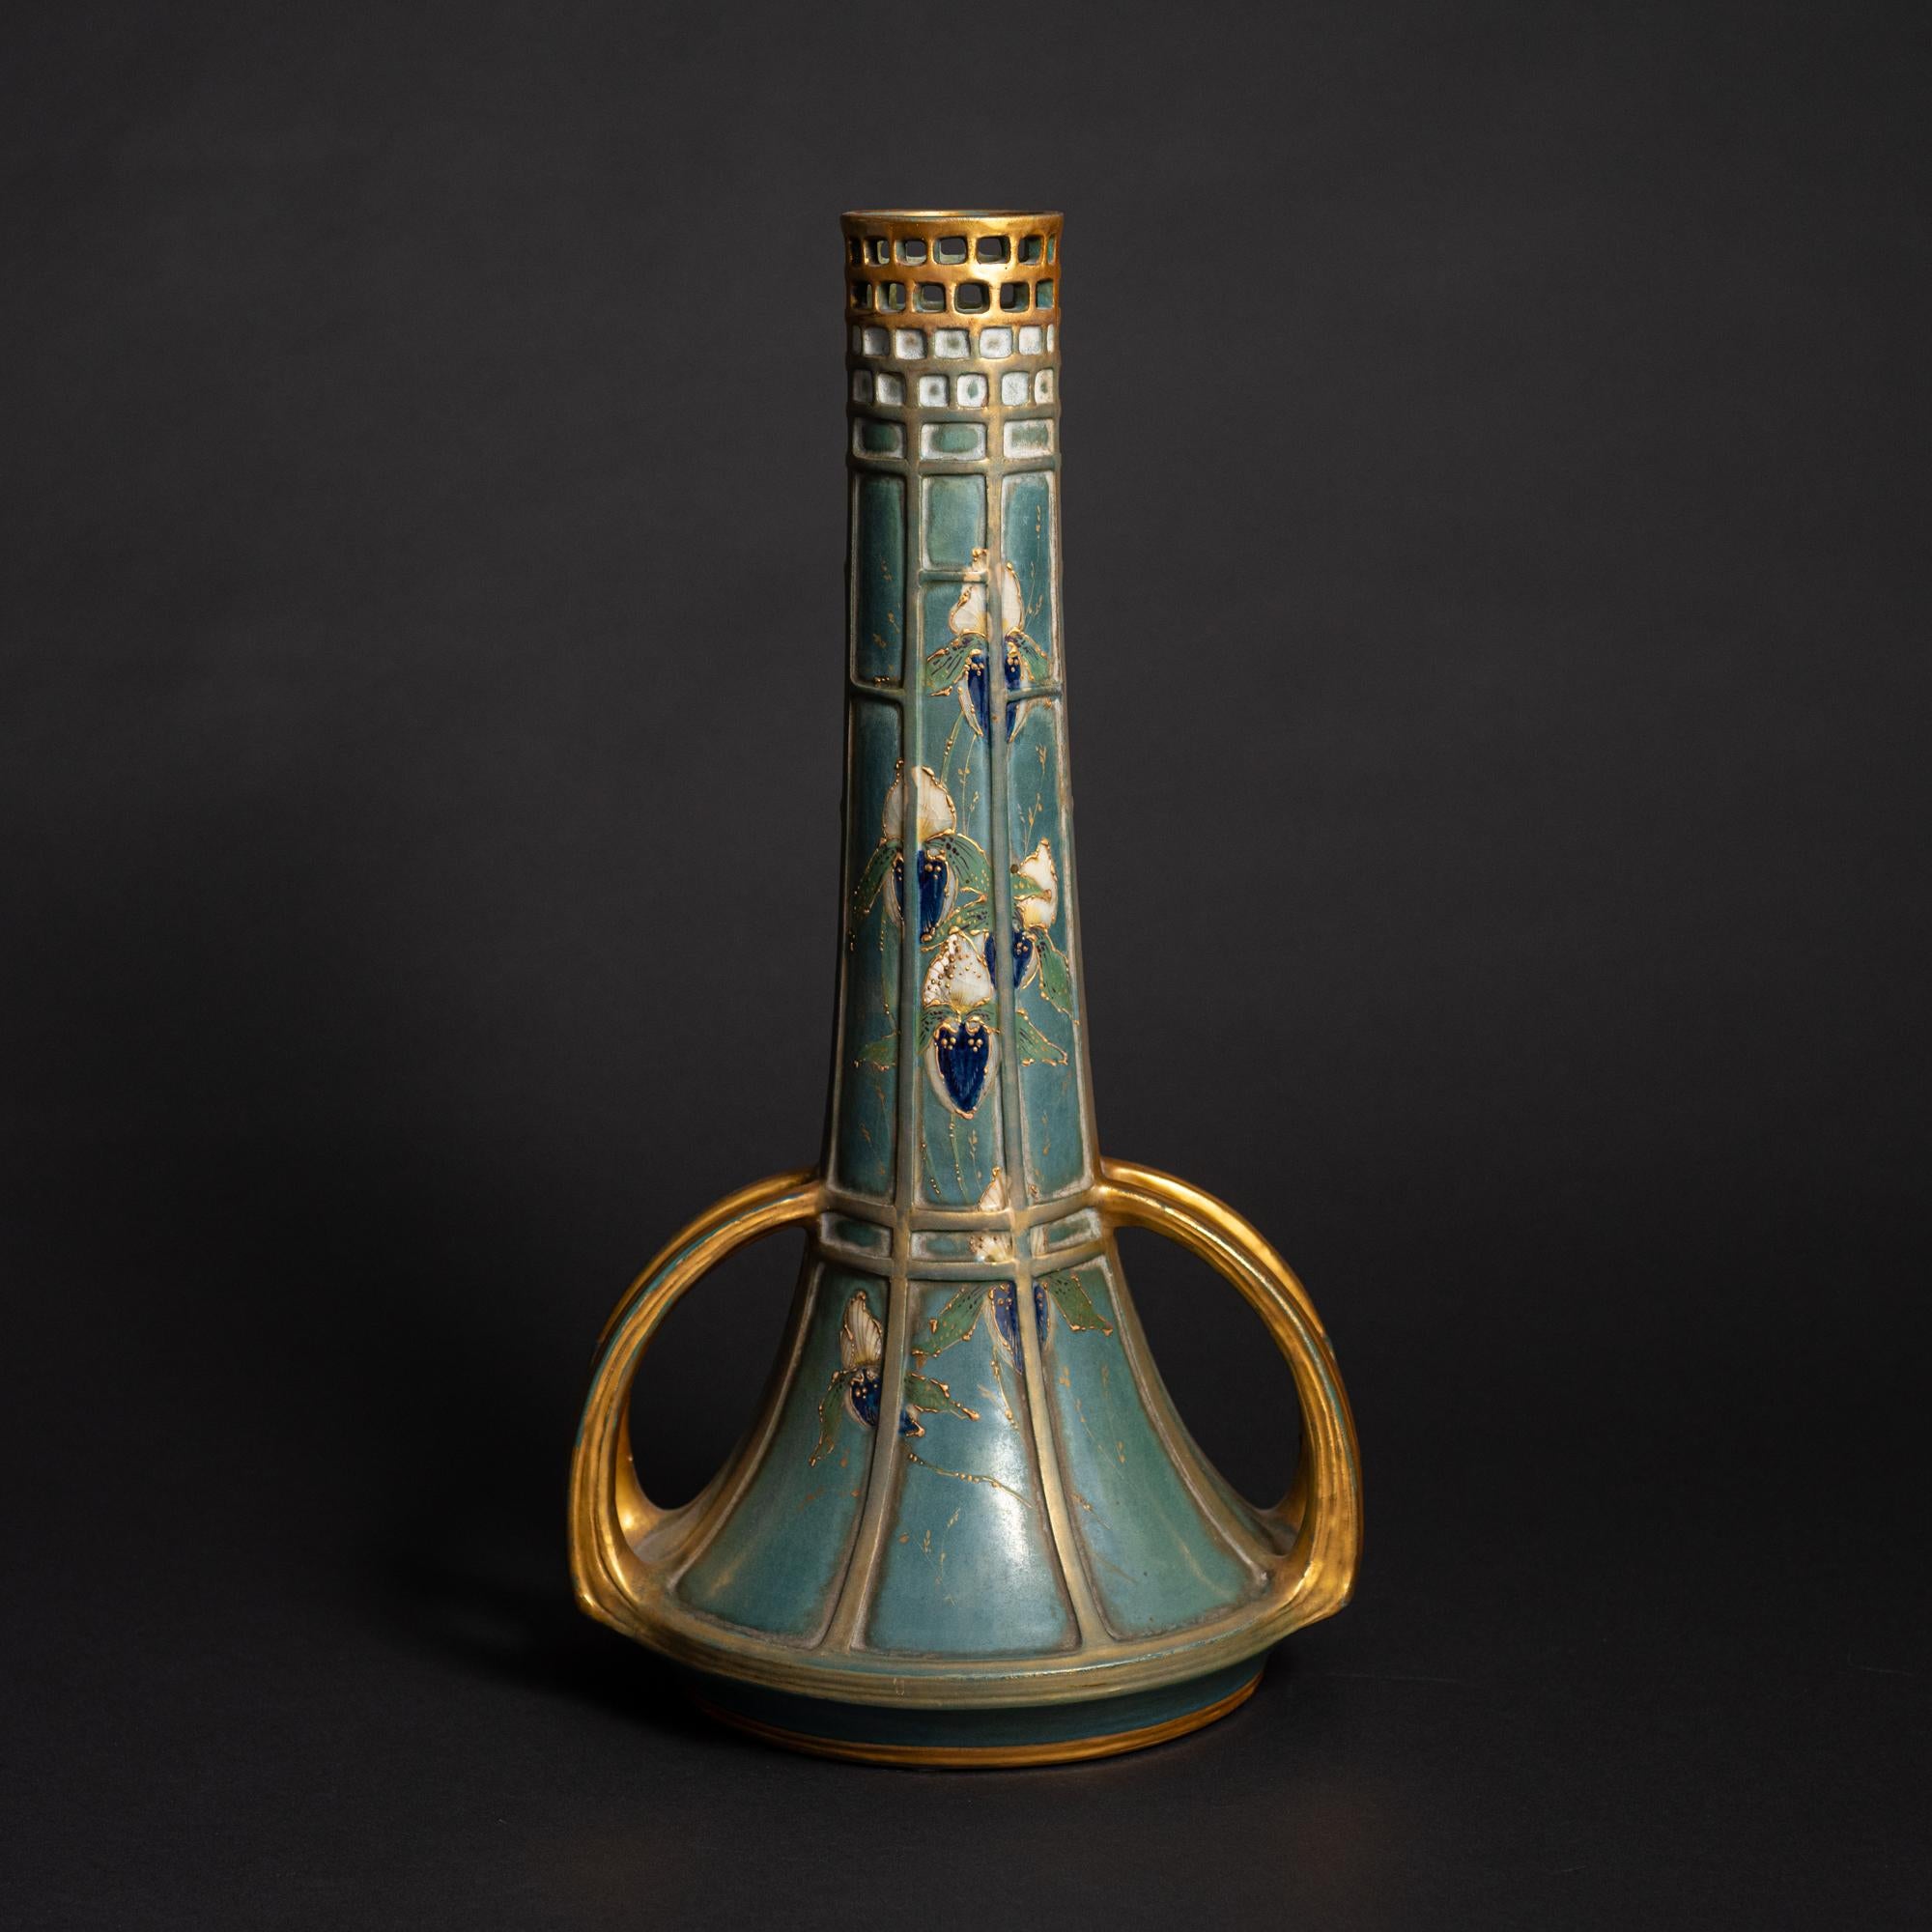 Paul Dachsel was the son-in-law of Alfred Stellmacher, the founder of Amphora Pottery company in Turn-Teplitz, then in Austria. Very little is known or was written about Dachsel. He served as a designer at Amphora from 1893 until 1905. There, he was